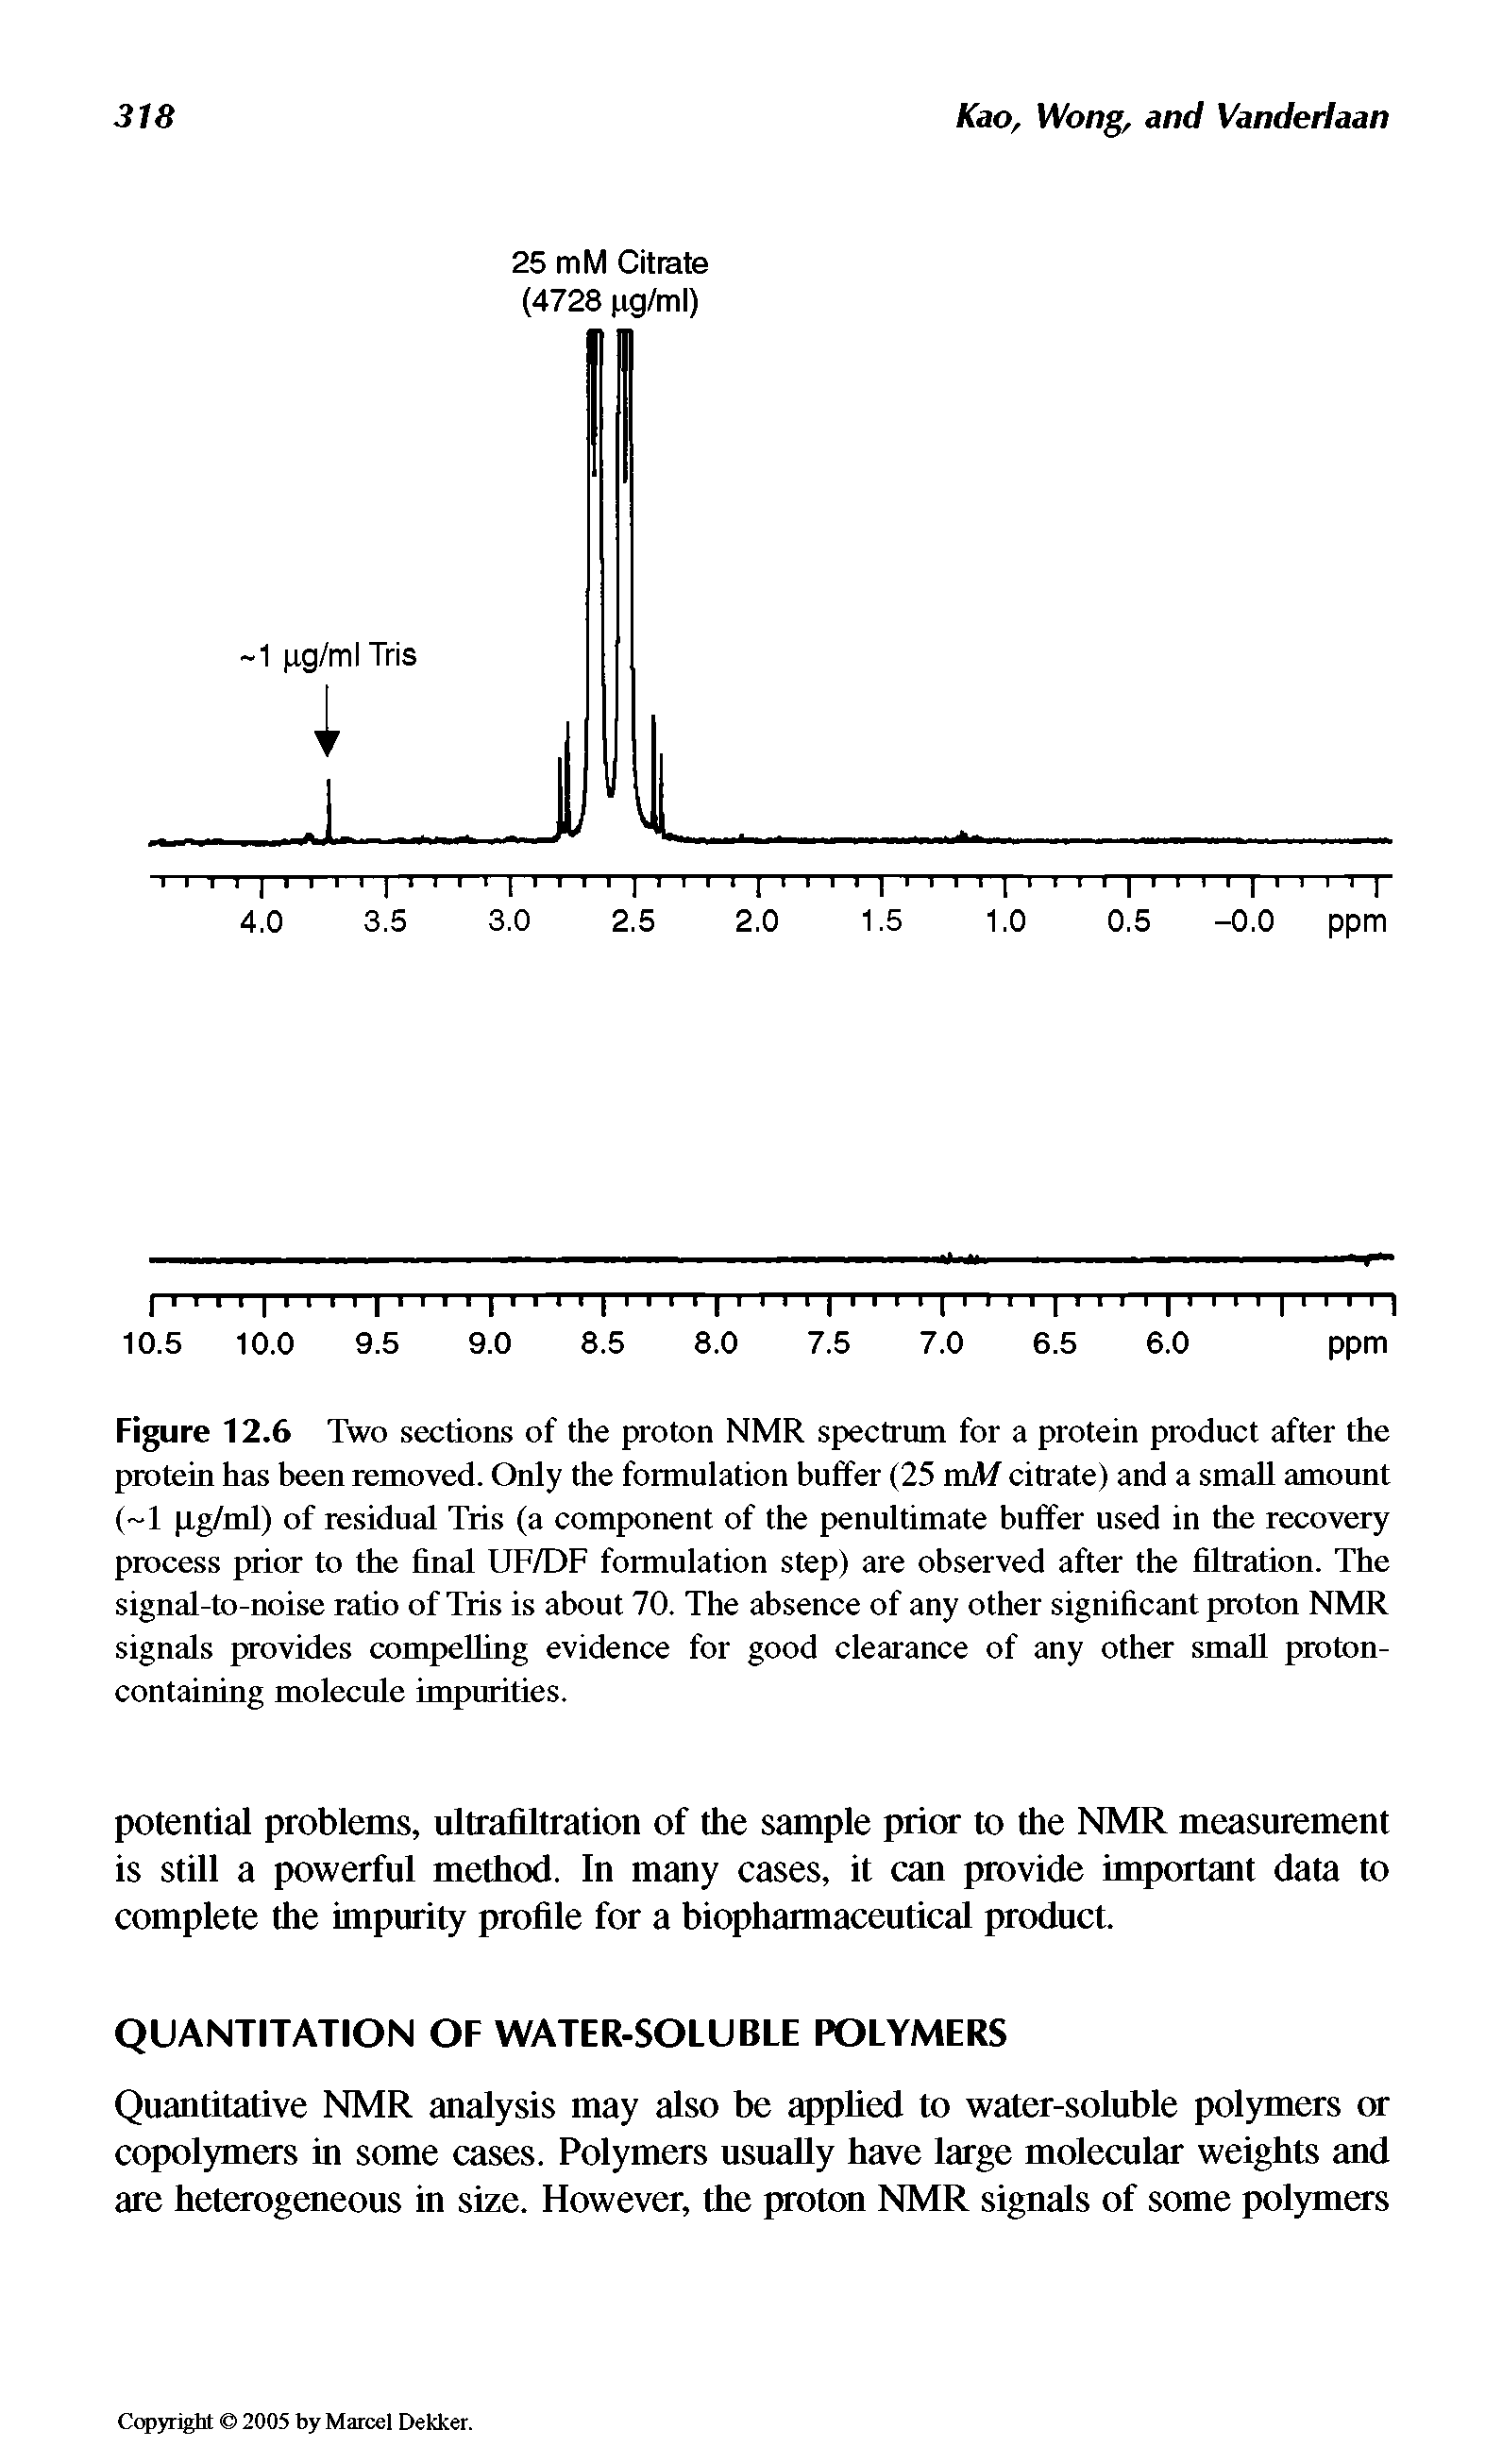 Figure 12.6 Two sections of the proton NMR spectrum for a protein product after the protein has been removed. Only the formulation buffer (25 mM citrate) and a small amount ( 1 pg/ml) of residual Tris (a component of the penultimate buffer used in the recovery process prior to the final UF/DF formulation step) are observed after the filtration. The signal-to-noise ratio of Tris is about 70. The absence of any other significant proton NMR signals provides compelling evidence for good clearance of any other small proton-containing molecule impurities.